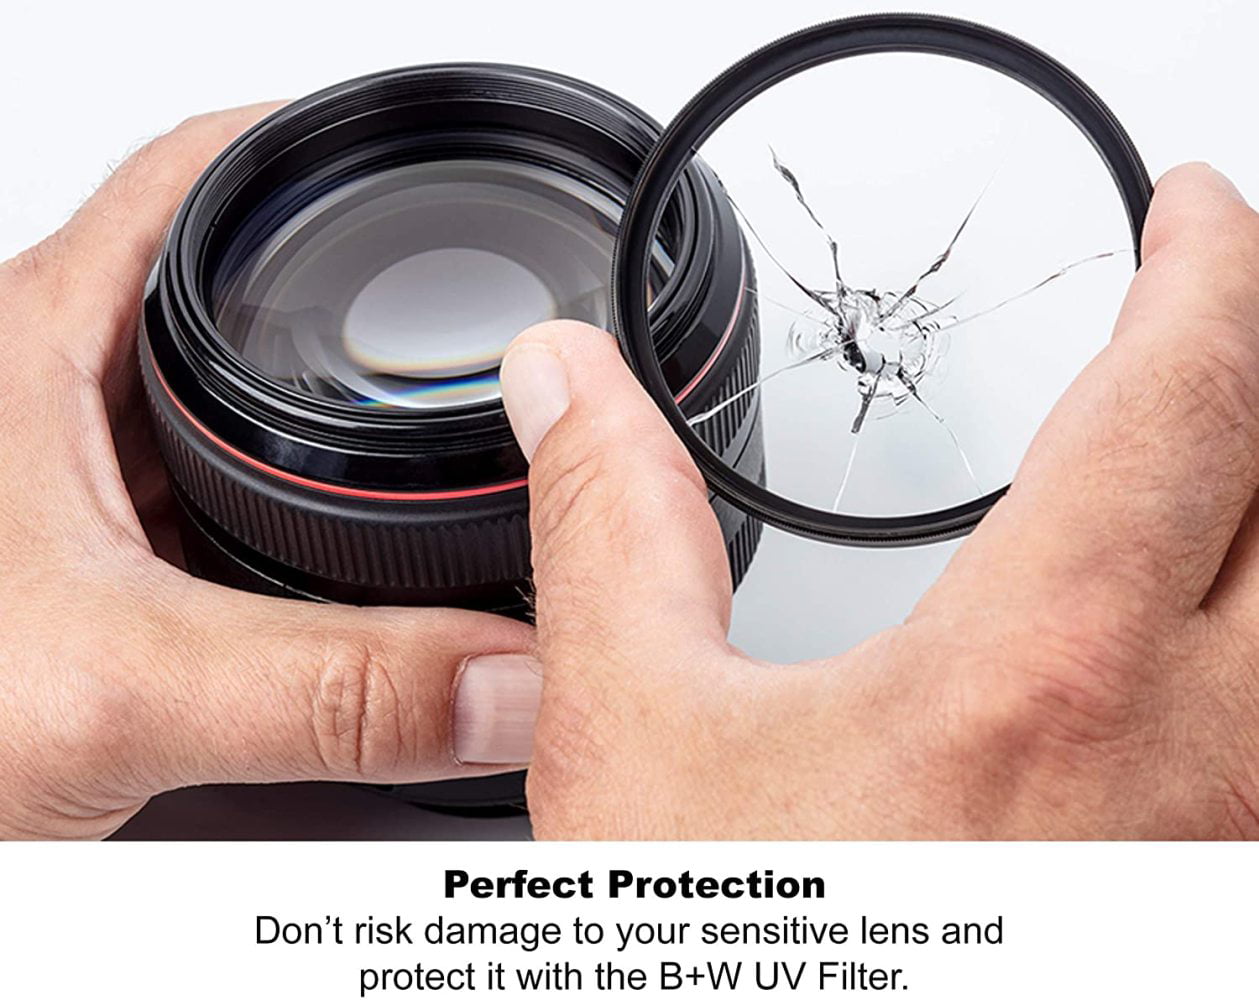 16 Layers Multi-Resistant and Nano Coating Clear Protector XS-PRO for Camera Lens MRC Nano 40.5 mm 010 Xtra Slim Mount W 40.5mm UV Protection Filter B Photography Filter 